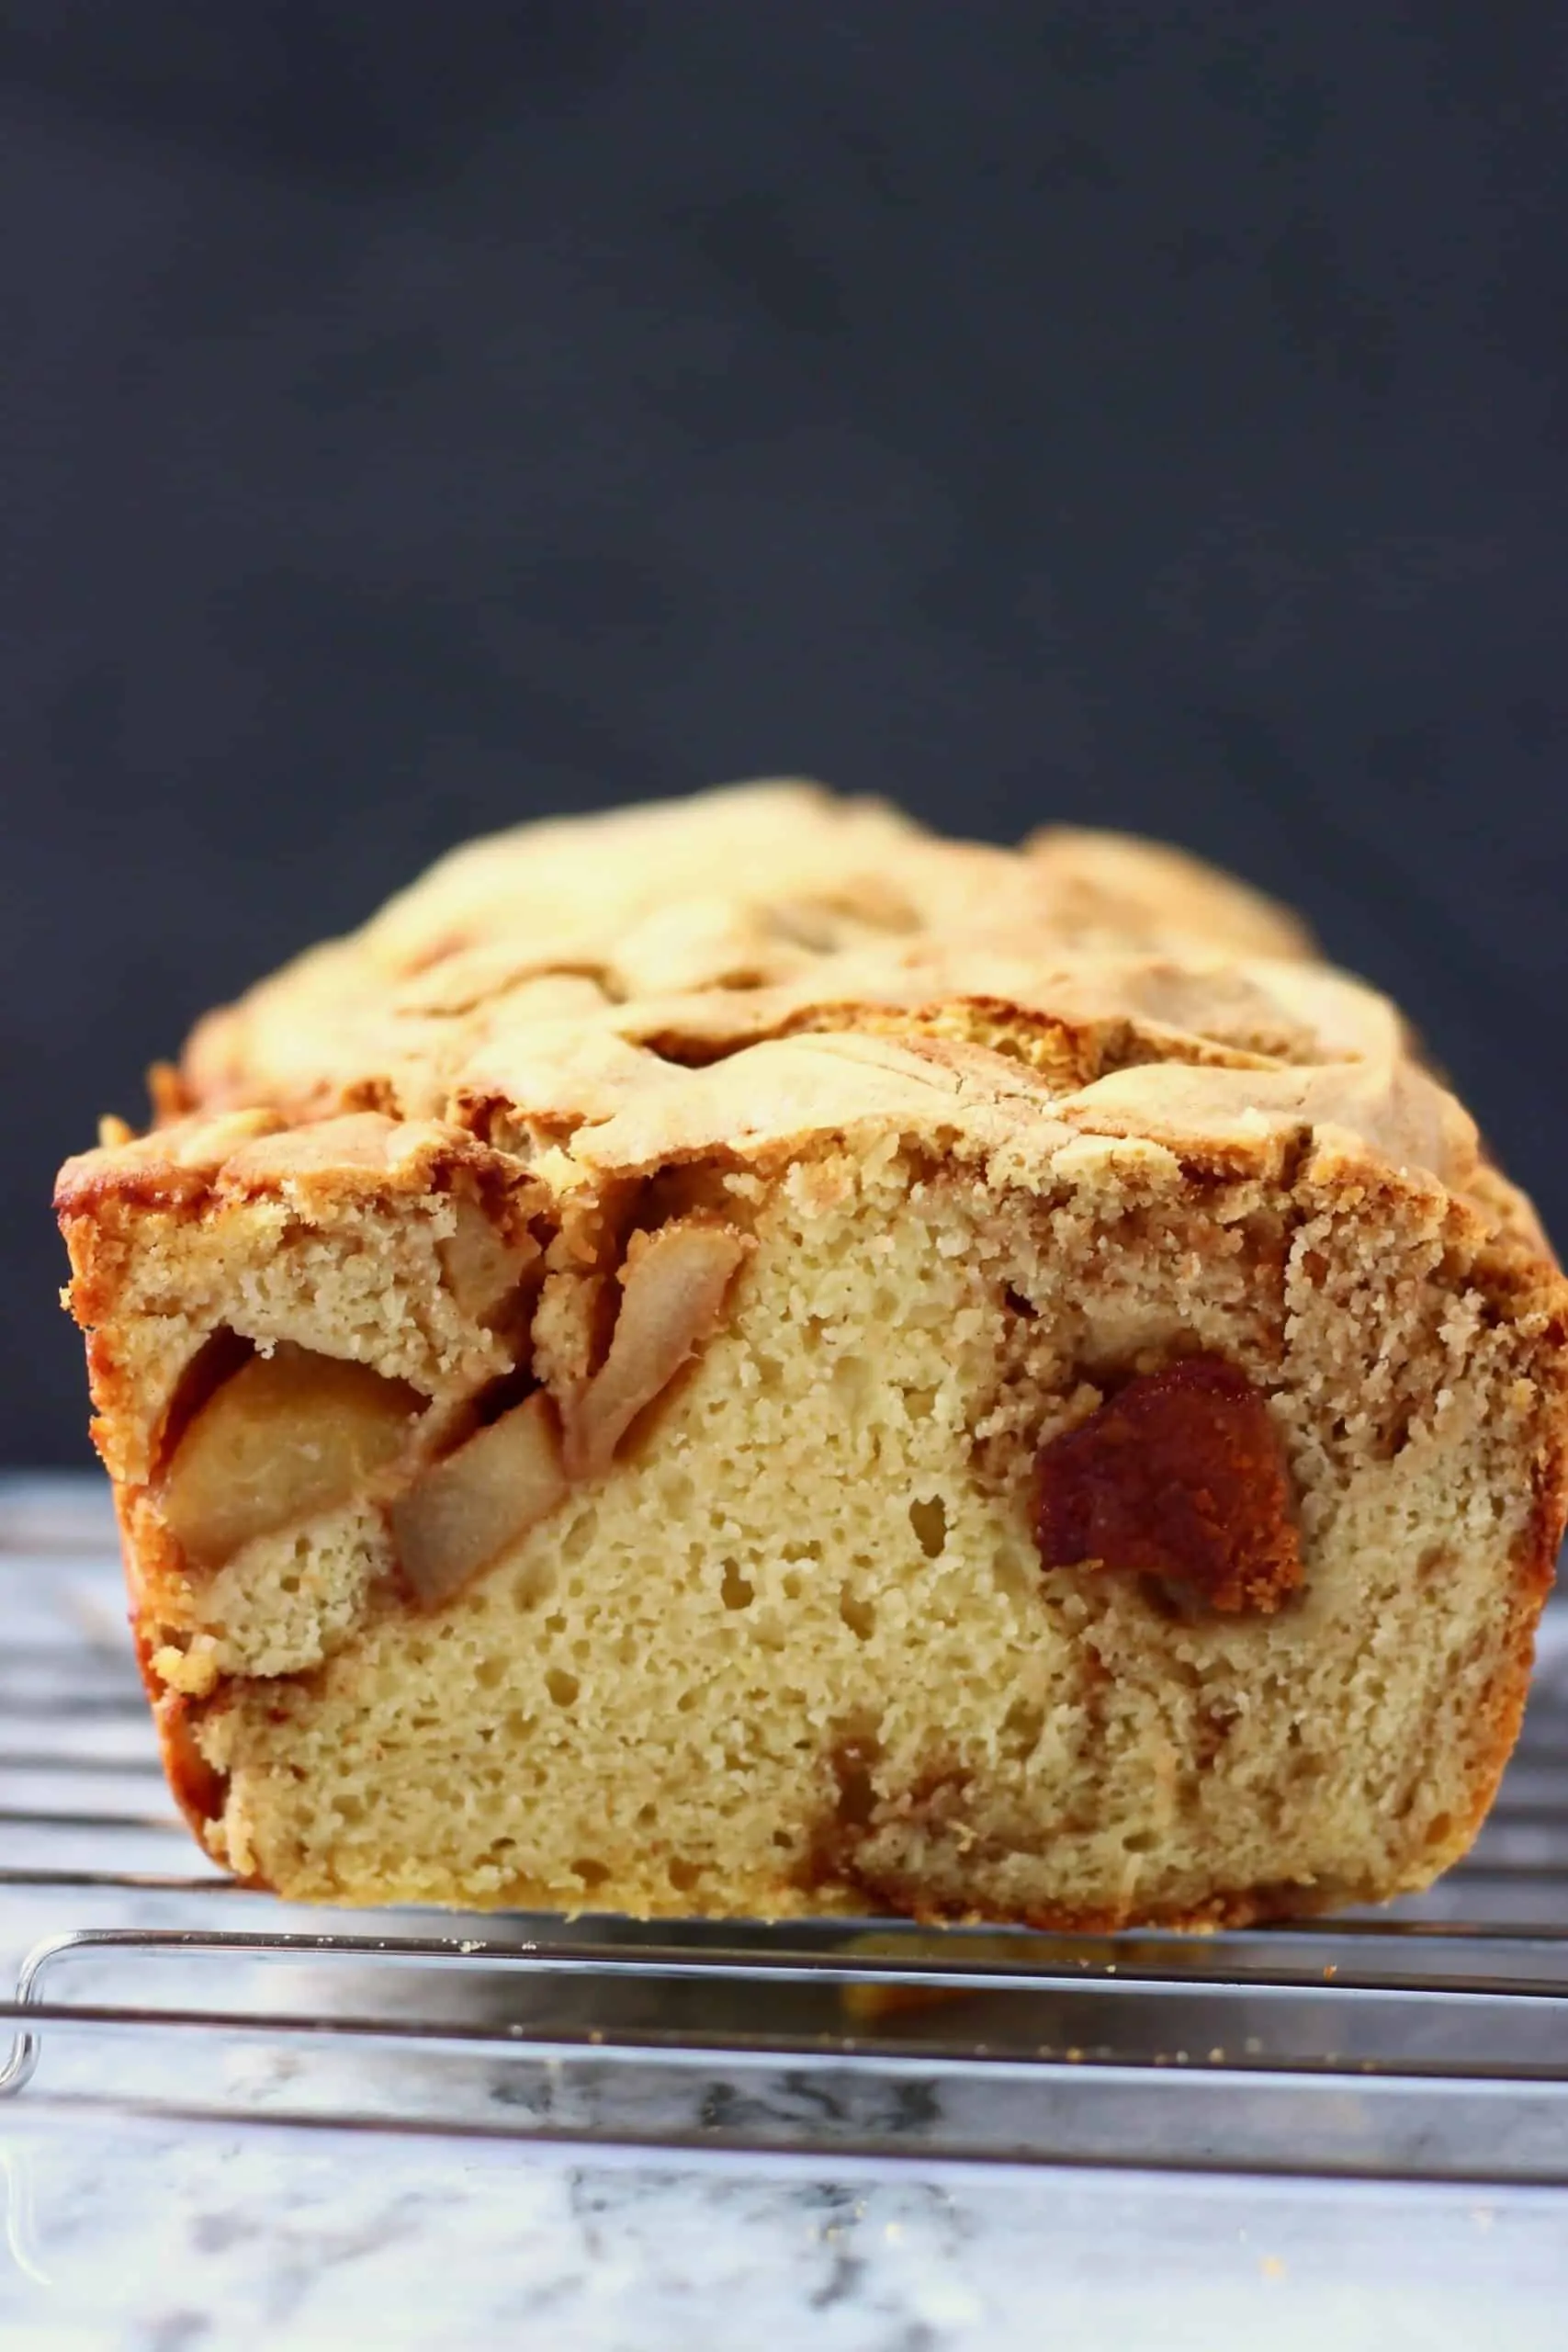 A loaf of bread with pieces of caramelised apples